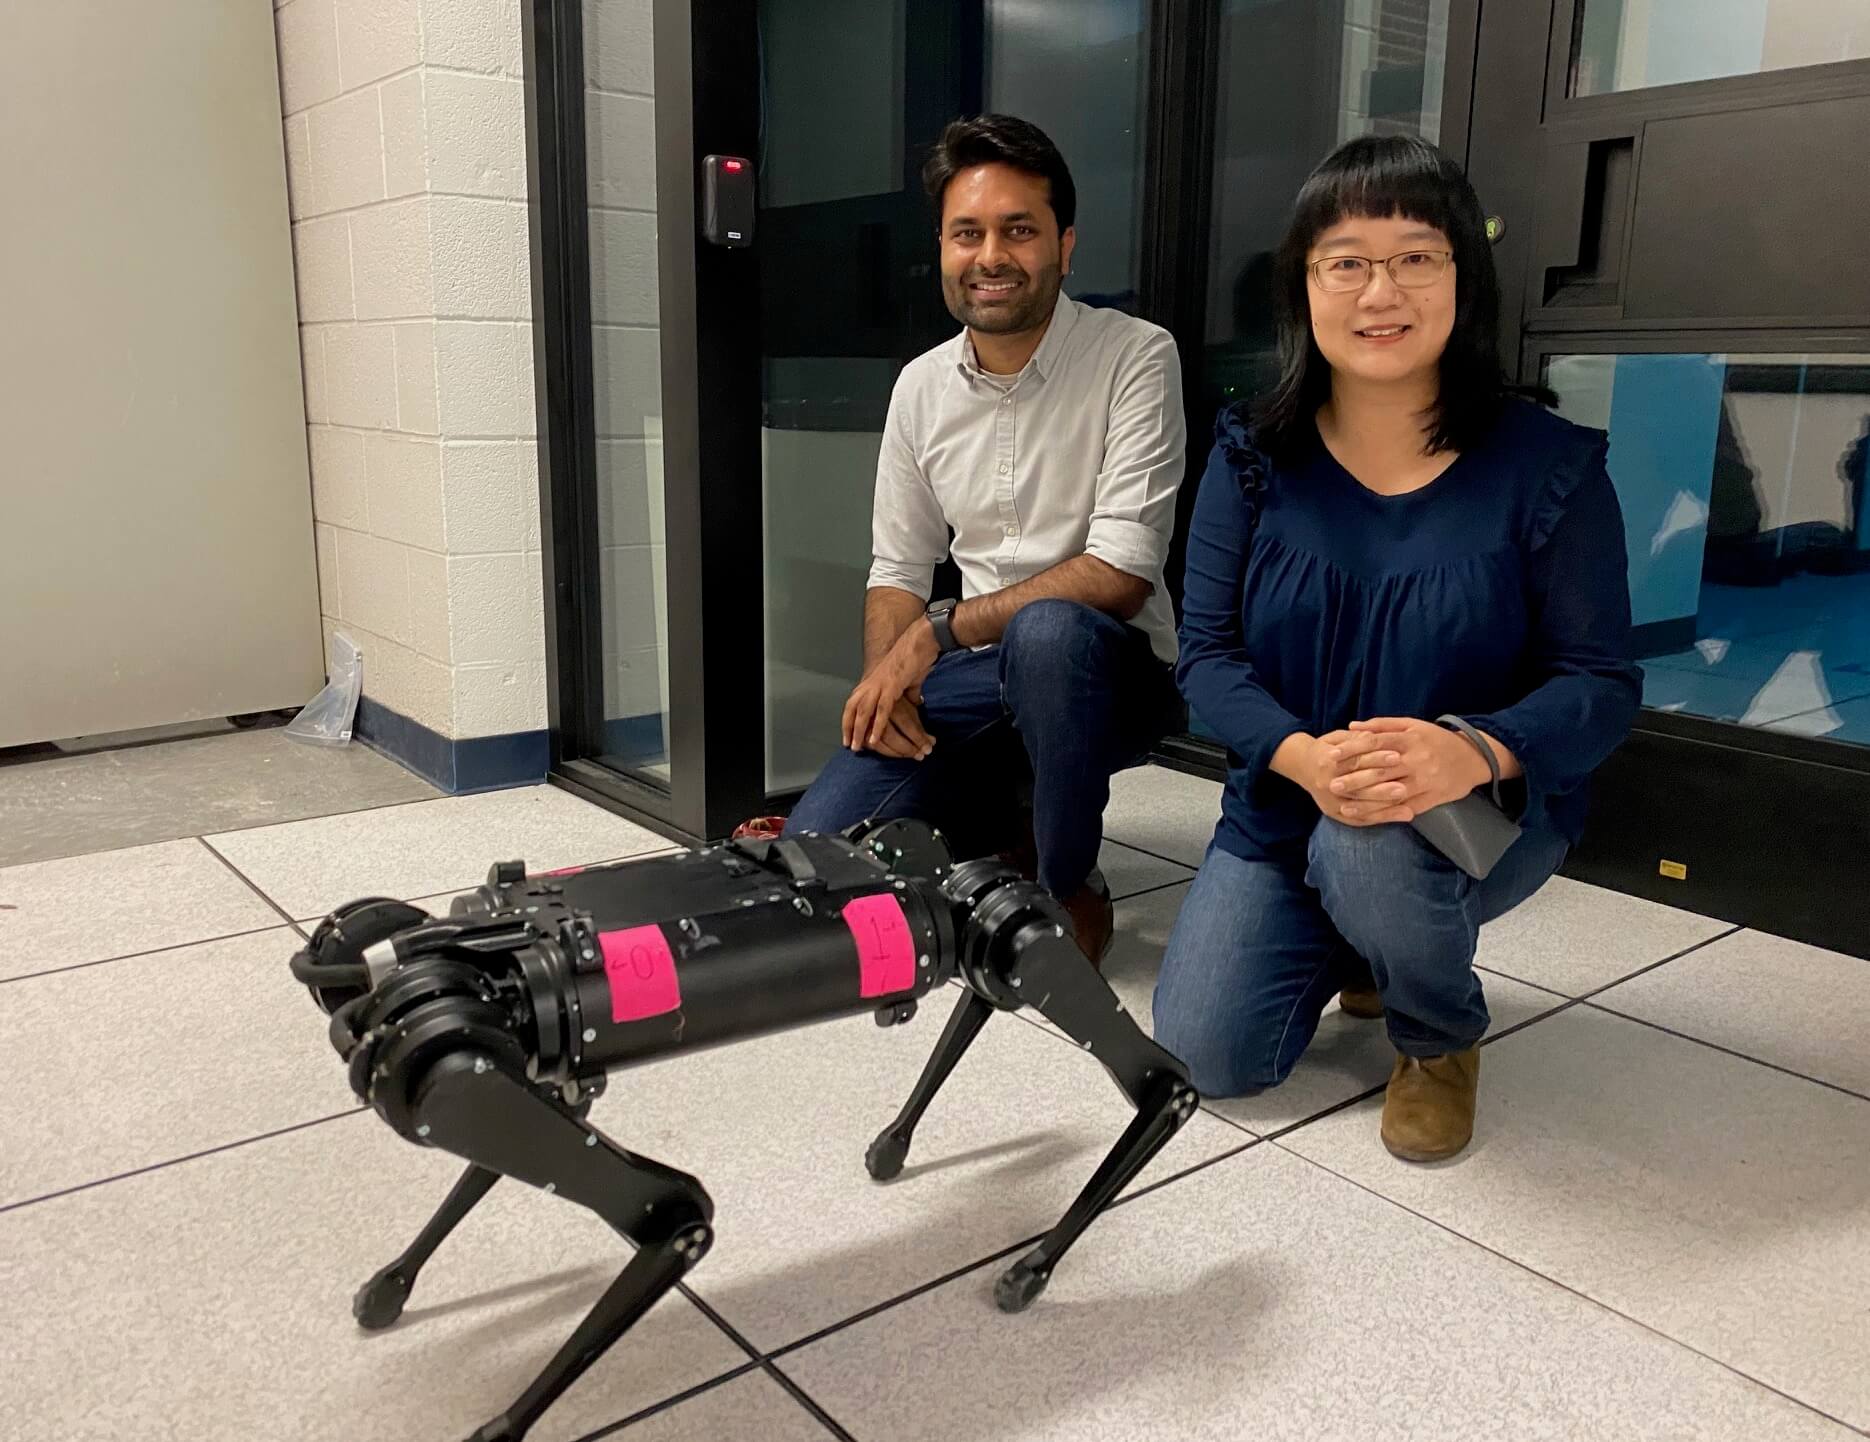 <em>Somil Bansal and Feifei Qian outside a lab in the basement of the Hughes Aircraft Electrical Engineering Center, where Prof. Qian programs legged robots to adjust to various terrain when walking. Her work and Prof. Bansal's robotics work share commonalities. (USC Photo/Landon Hall)</em>